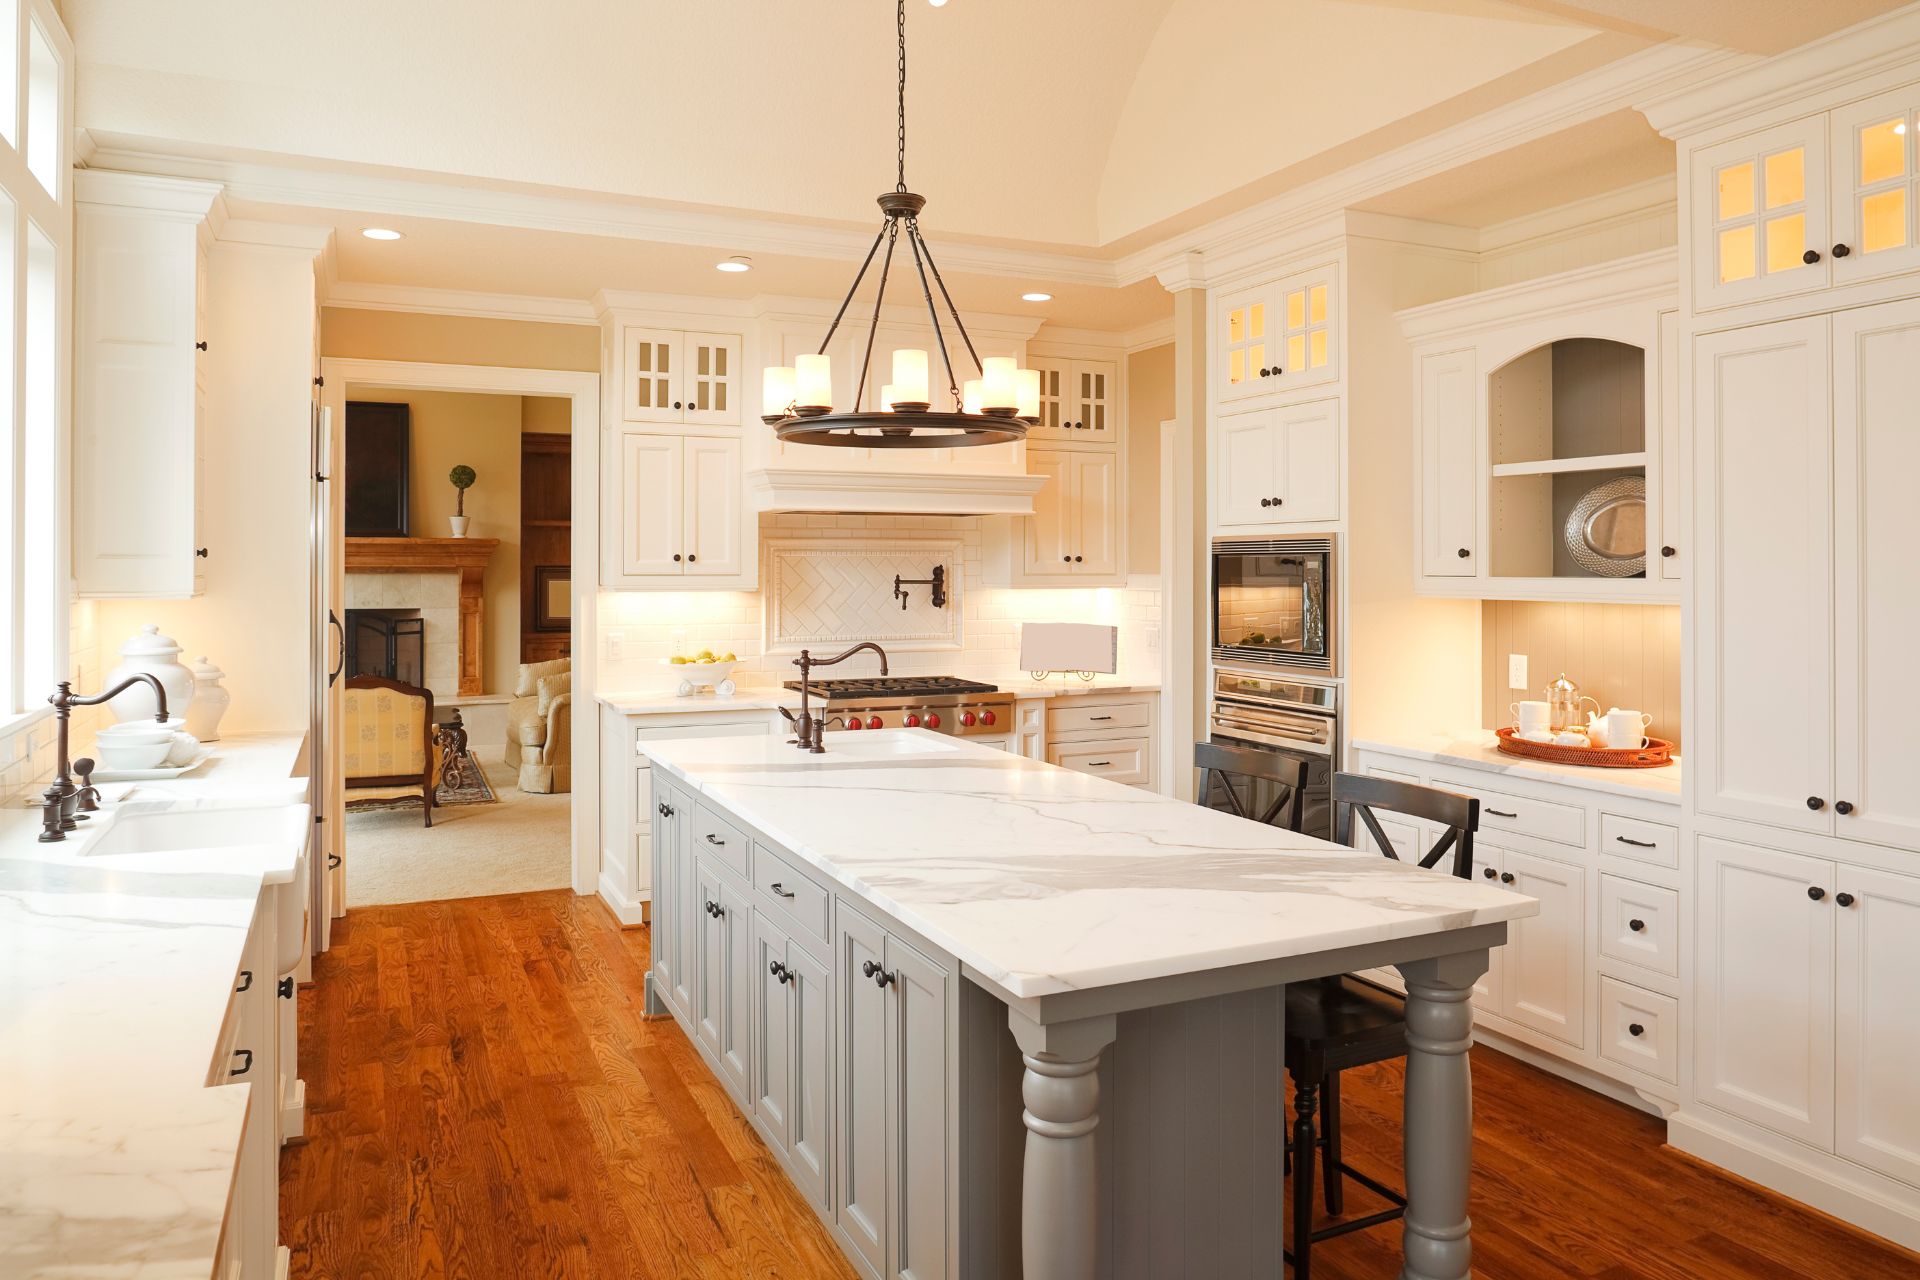 Luxury Kitchen Design Ideas: Creating a Culinary Haven